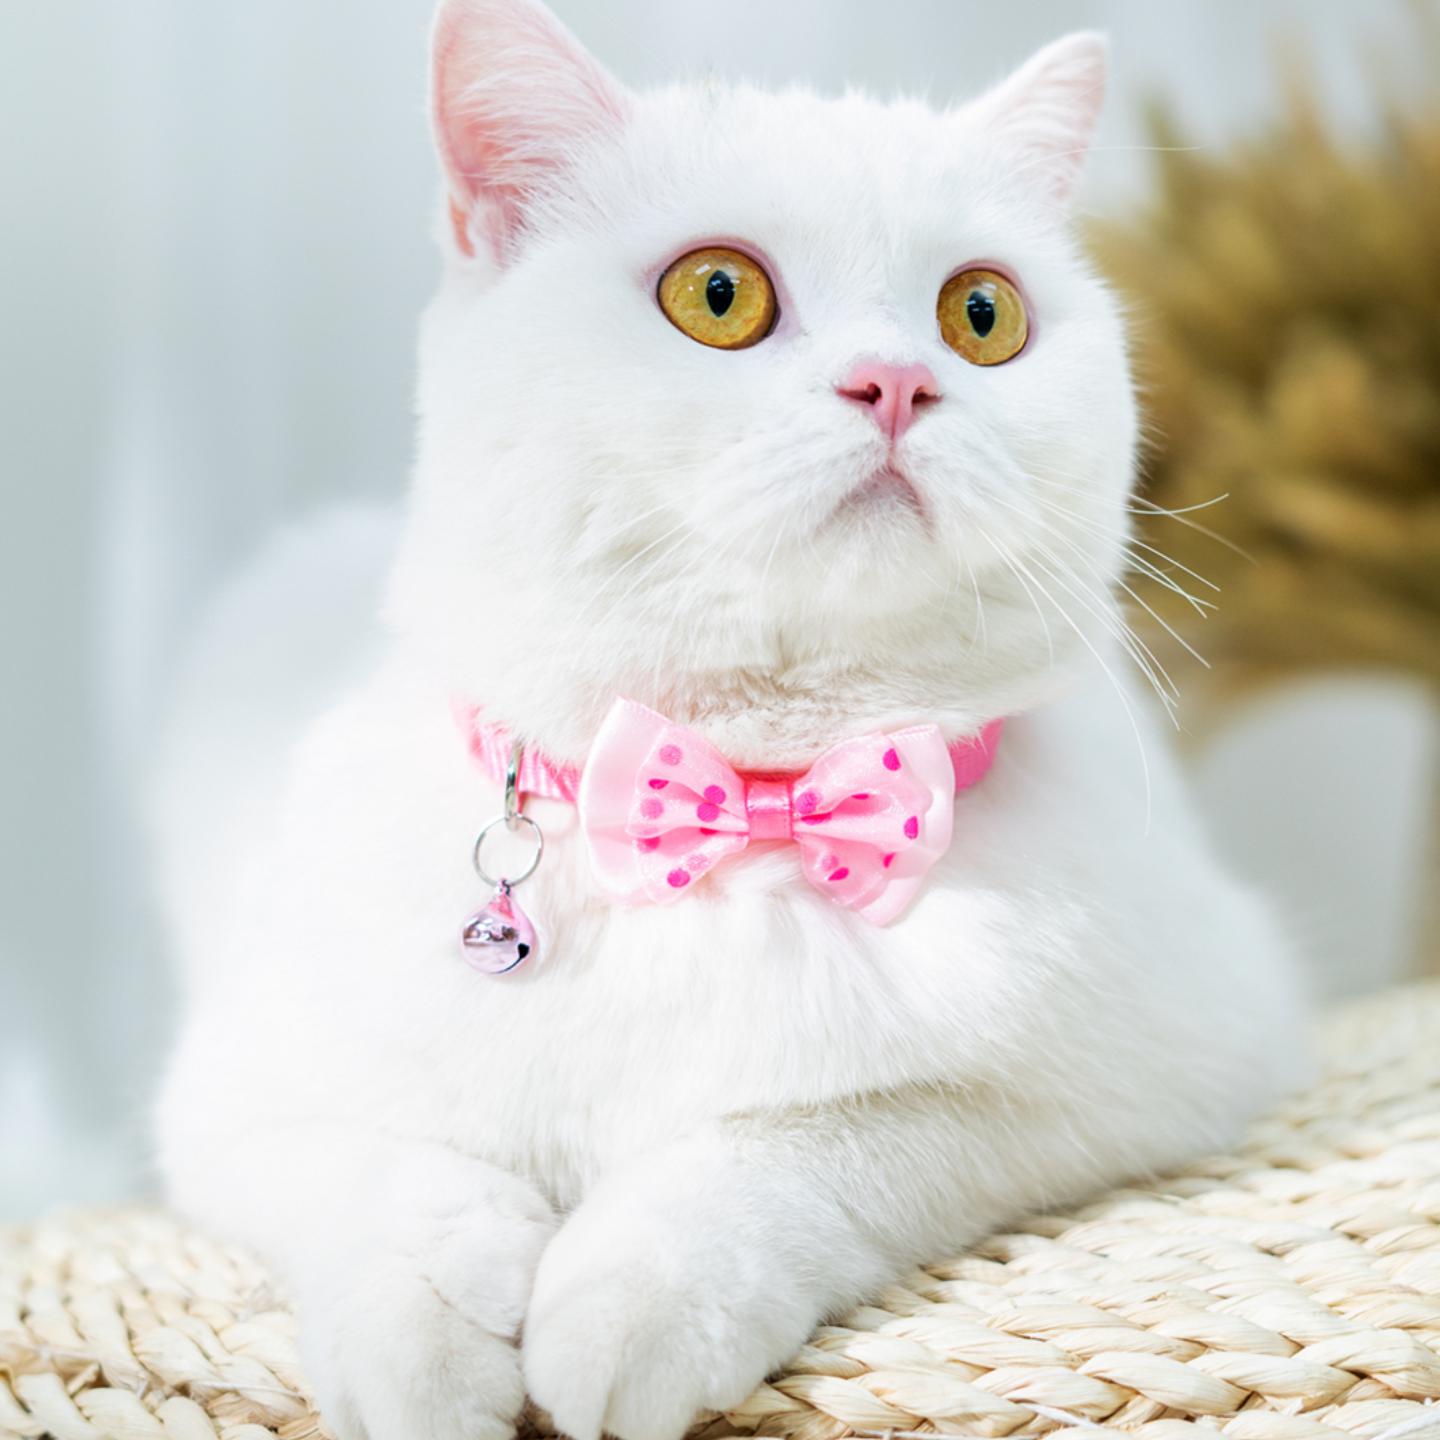 Plain cat collar with tie with ring bell